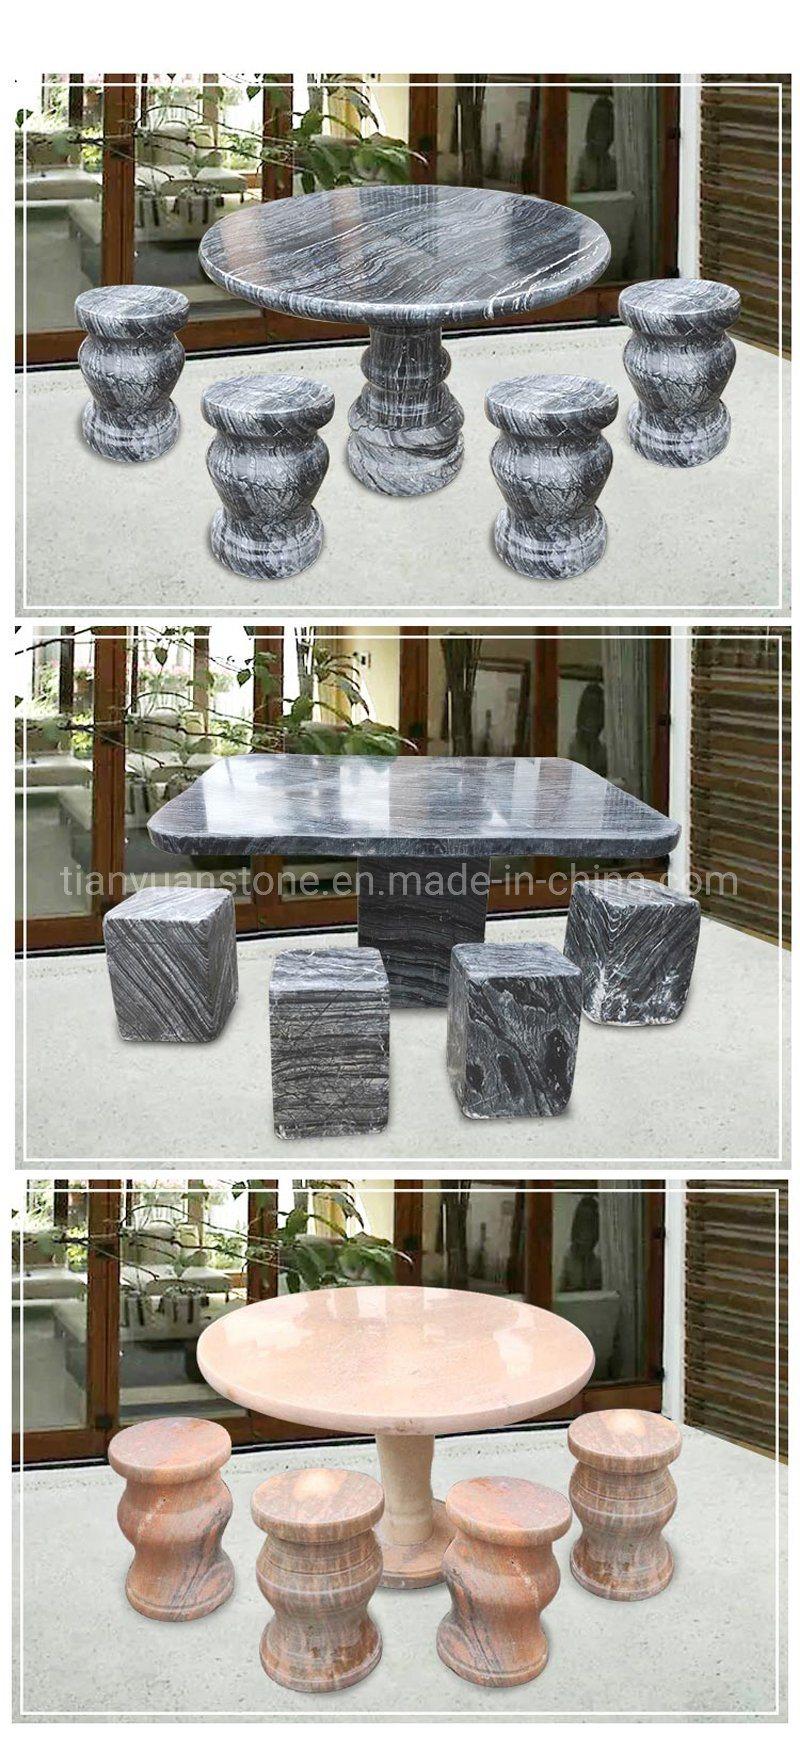 Green Granite Stone Outdoor Park Bench and Table